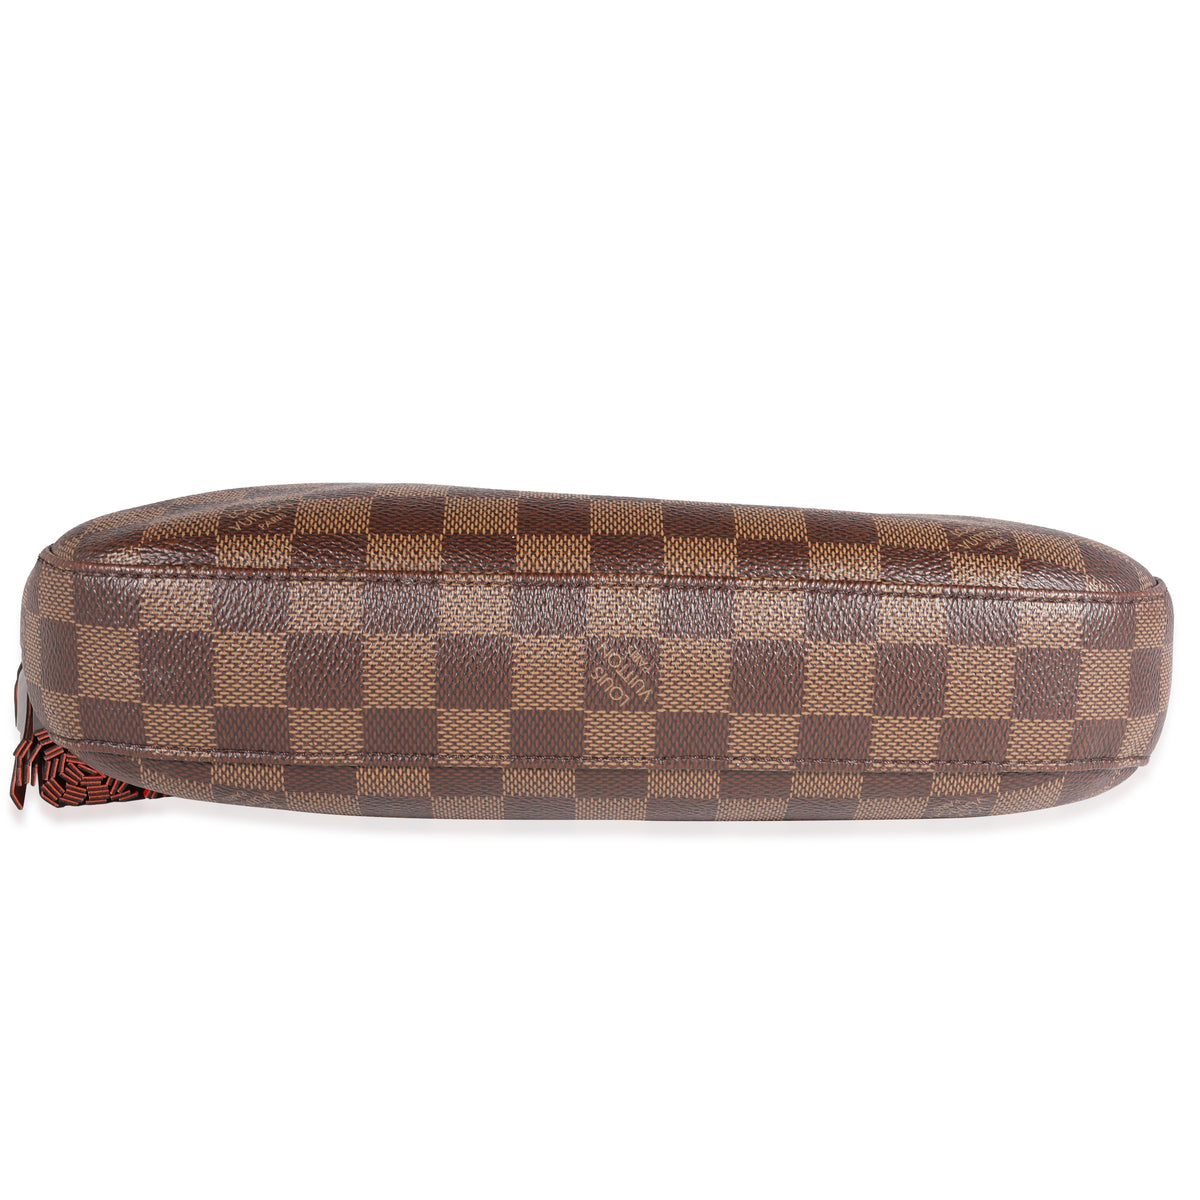 Buy Online Louis Vuitton-DAMIER SOUTH BANK BESACE with Attractive